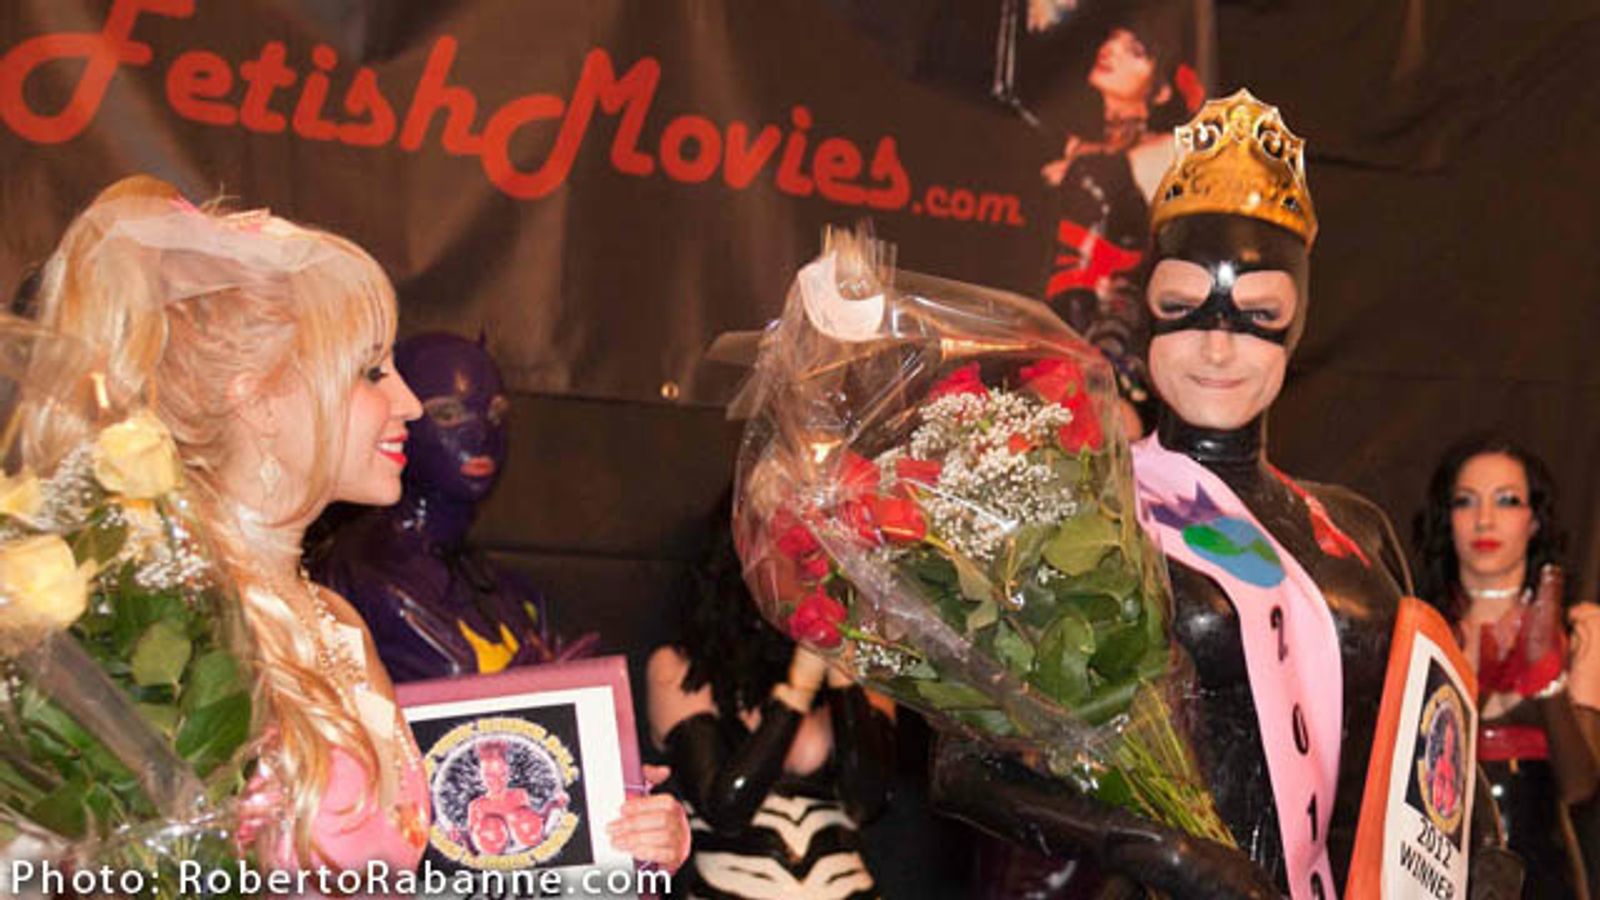 Kylie Marilyn Crowned Miss Rubber World 2012